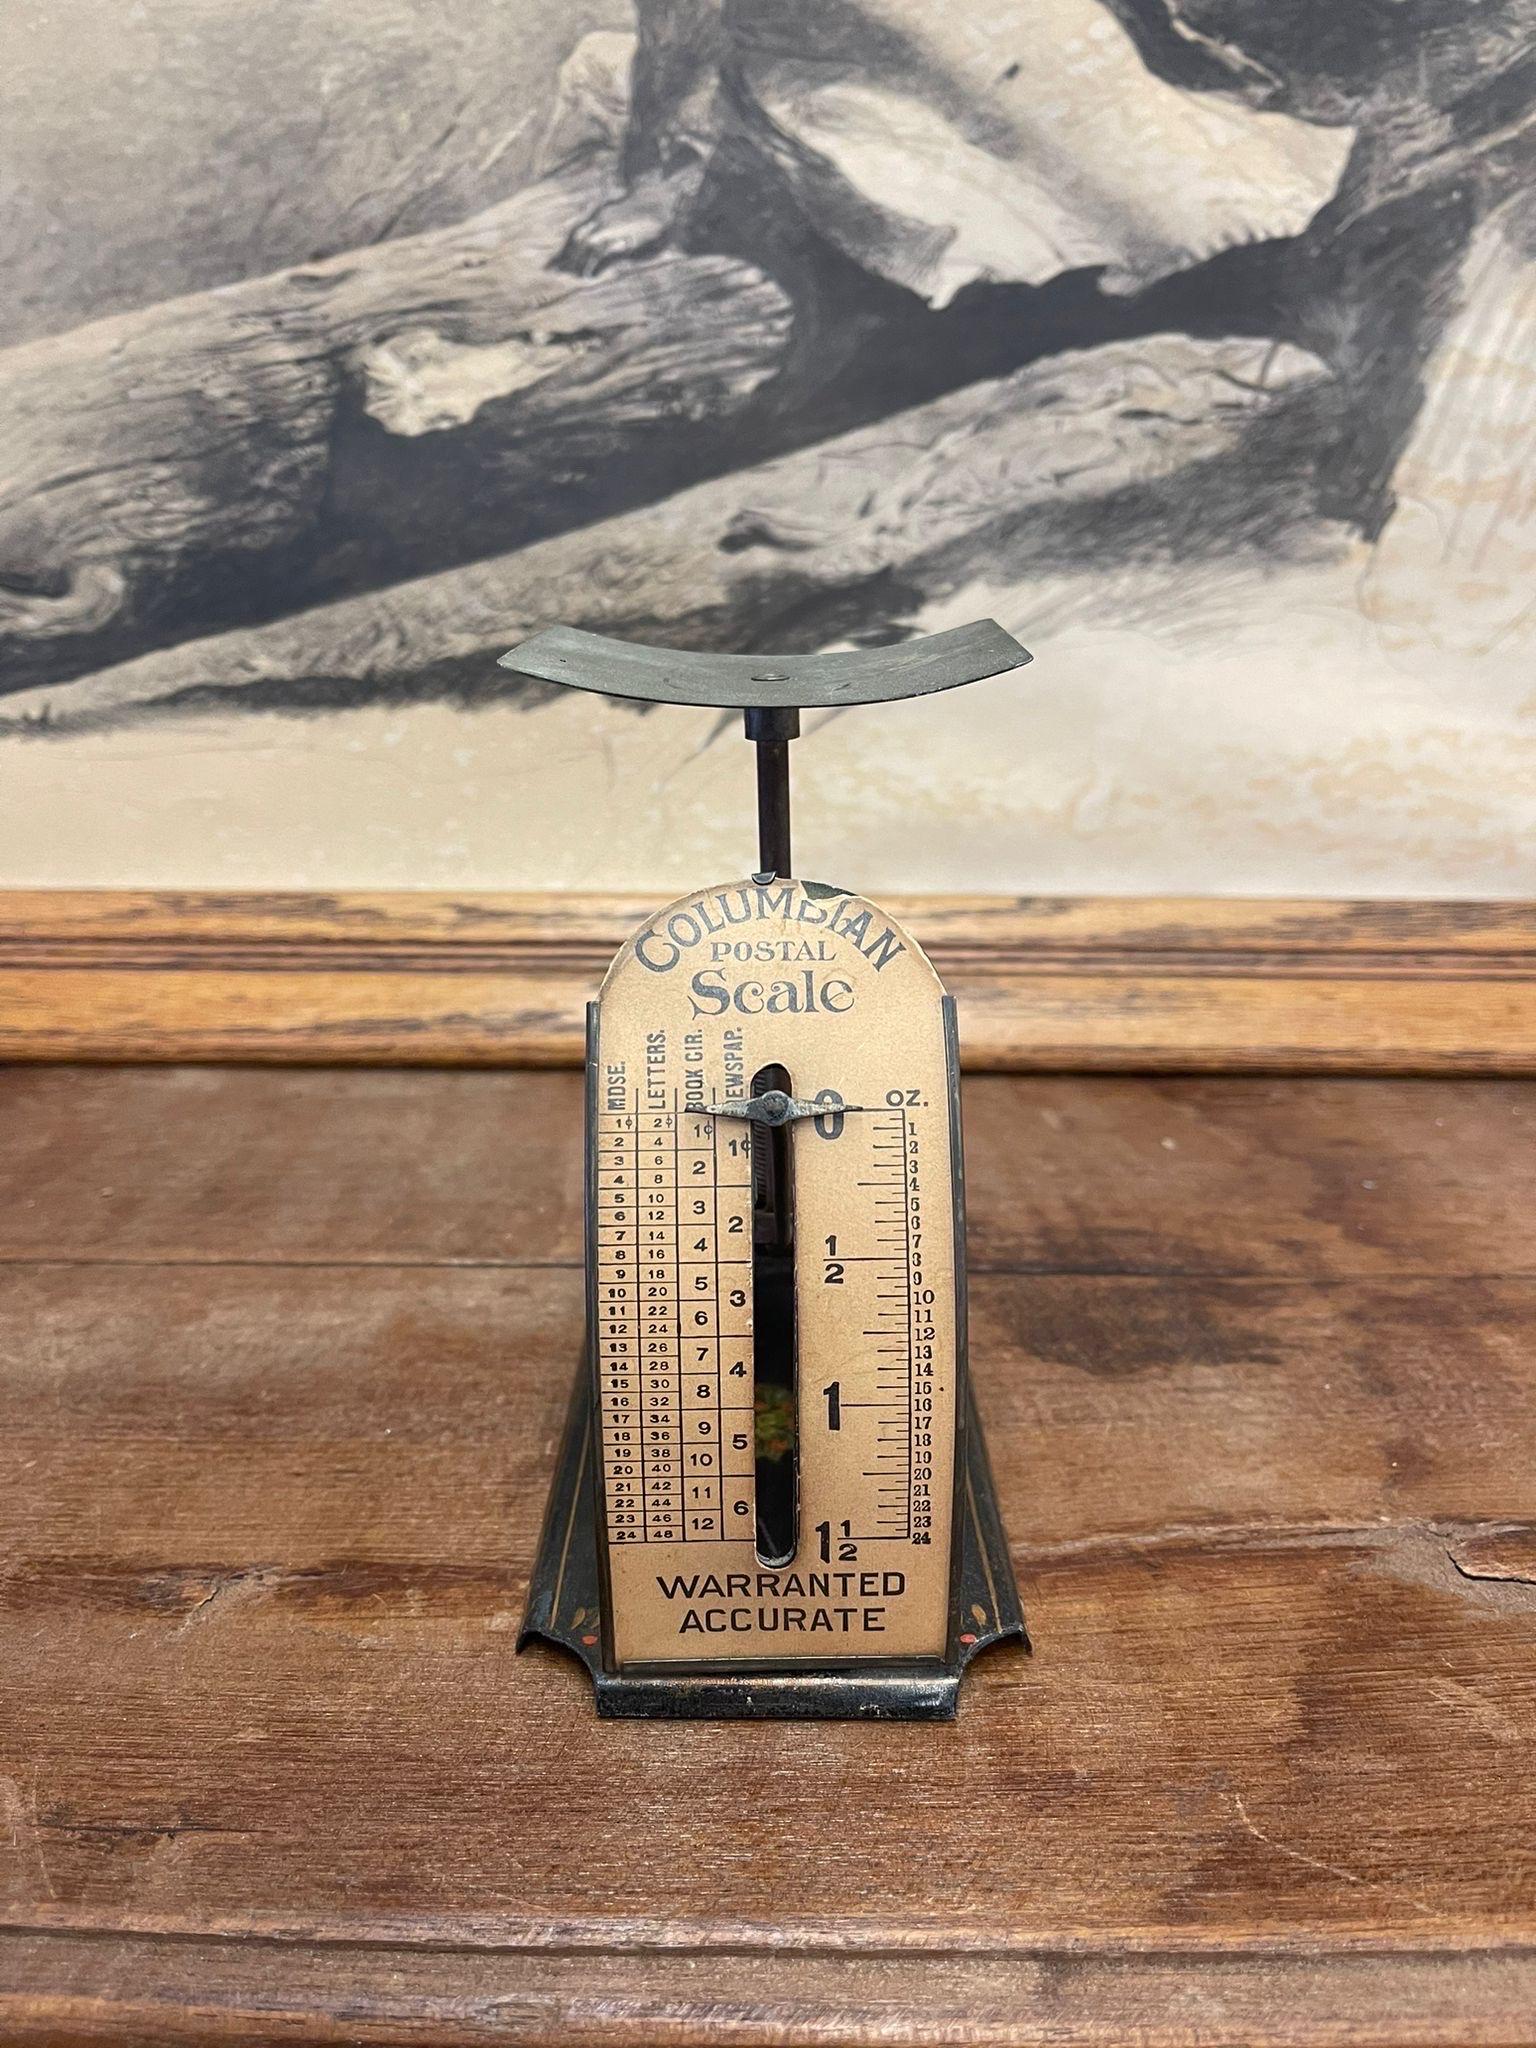 Postal Scale that Weighs items up to  1.5 oz. Beautiful Petina to the Metal and the Label. Floral Motif on the Bottom. Vintage Condition Consistent with Age as Pictured.

Dimensions. 5 W ; 3 D ; 6 H